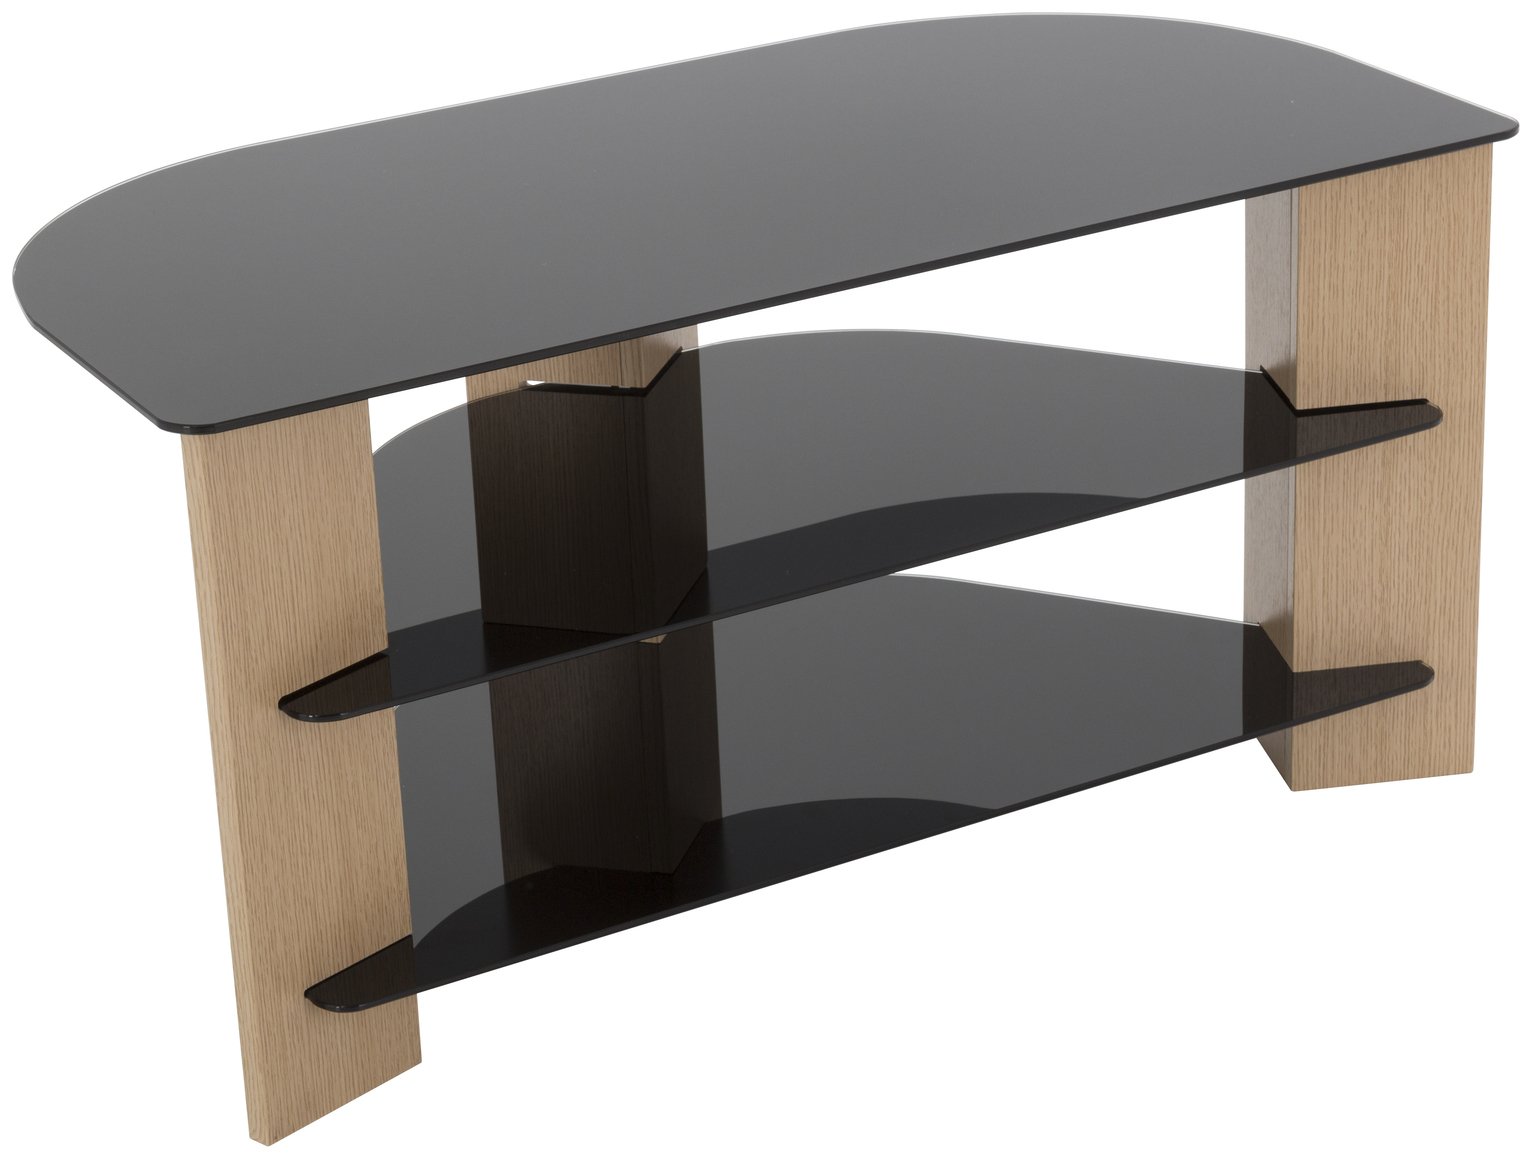 Oak Tv Stand | Find It For Less